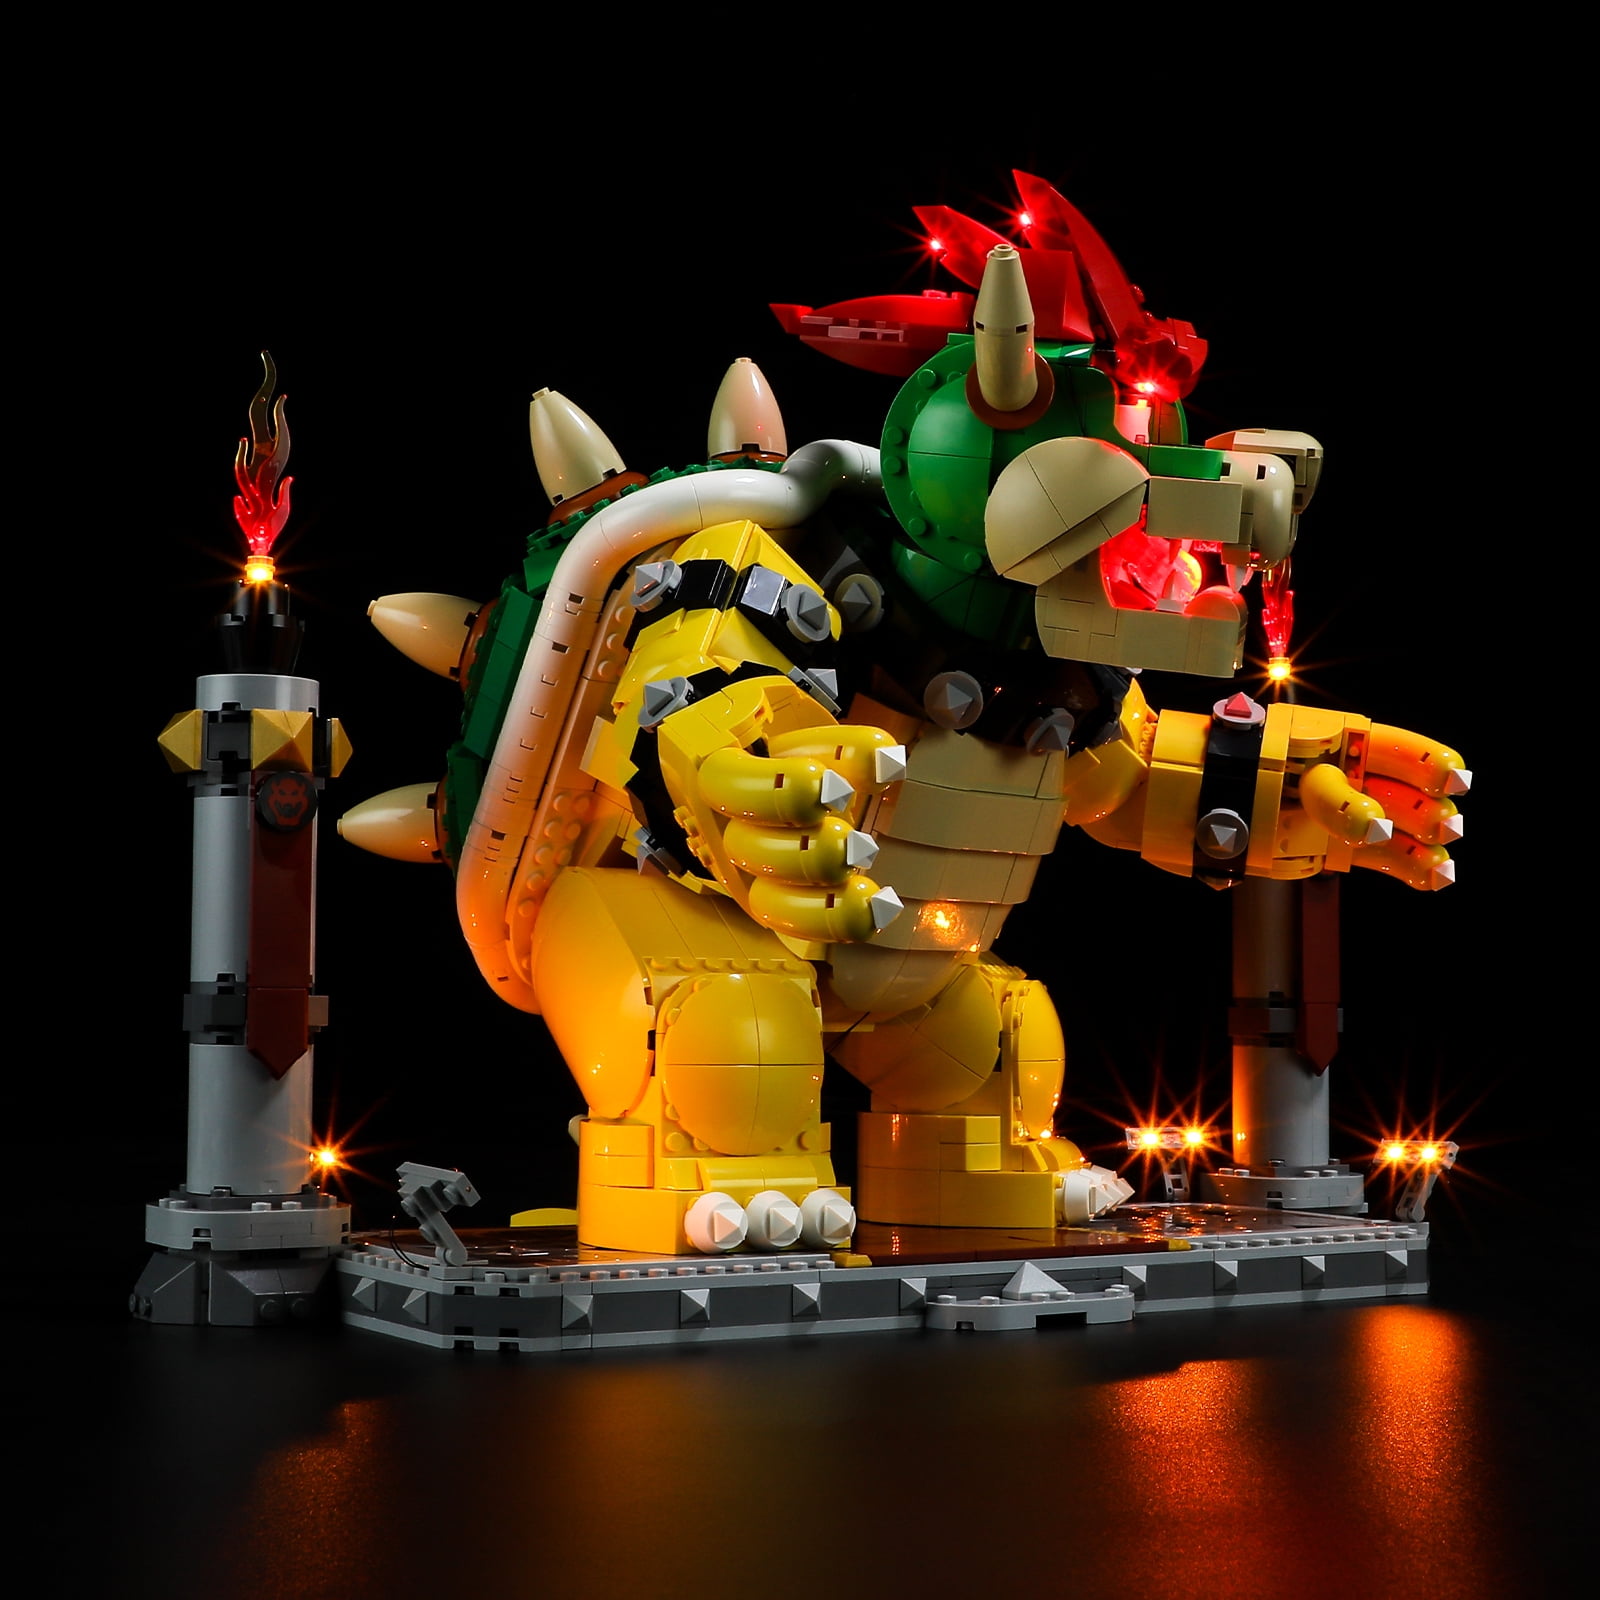 Light Kit For The Mighty Bowser 71411 – LeLightGo